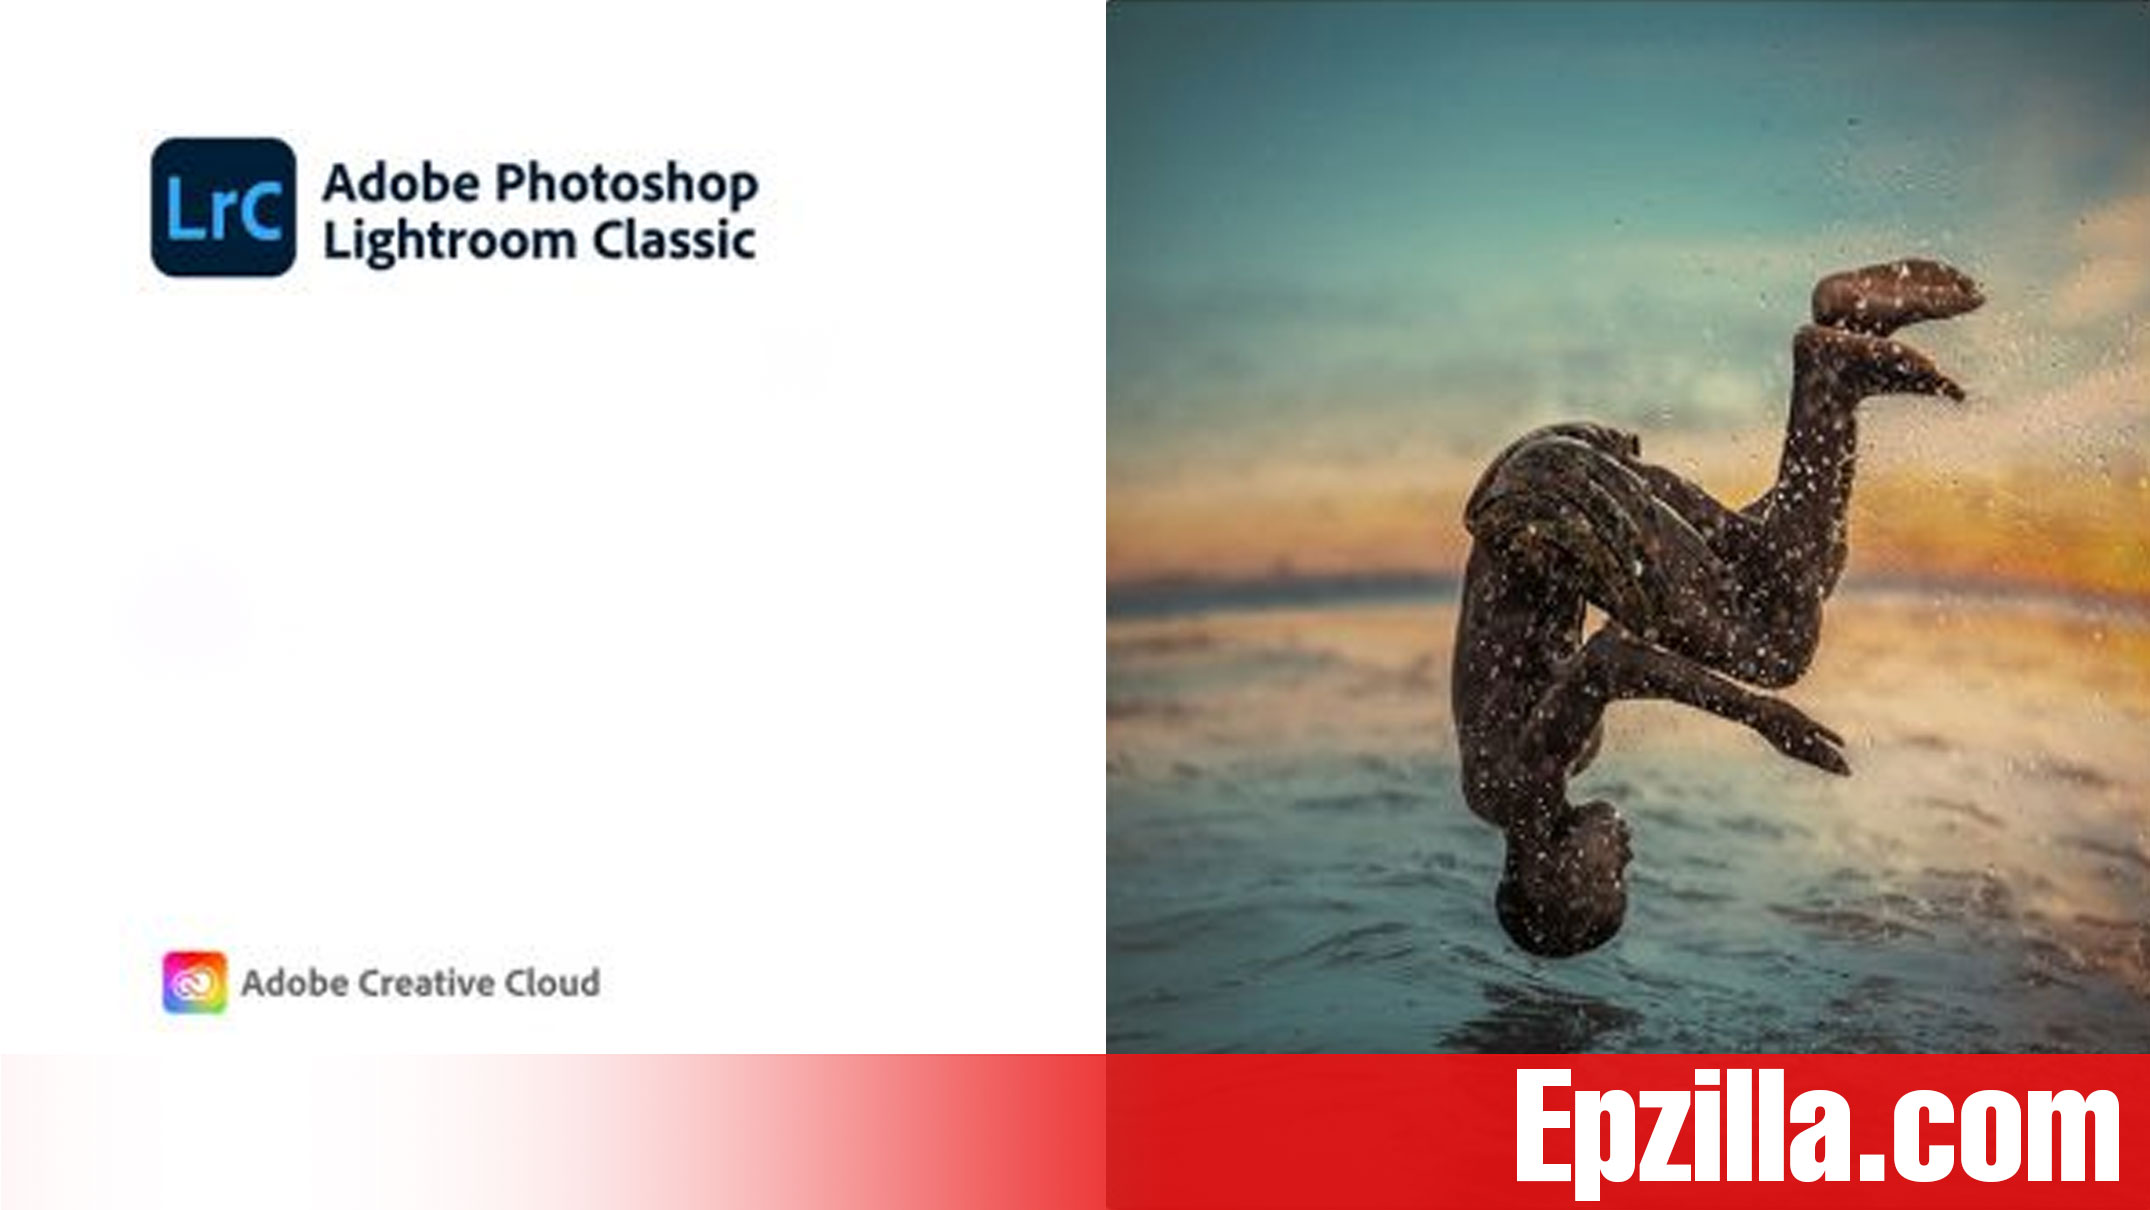 Adobe Photoshop Lightroom Classic 2022 v11.1 Pre-Activated Free Download